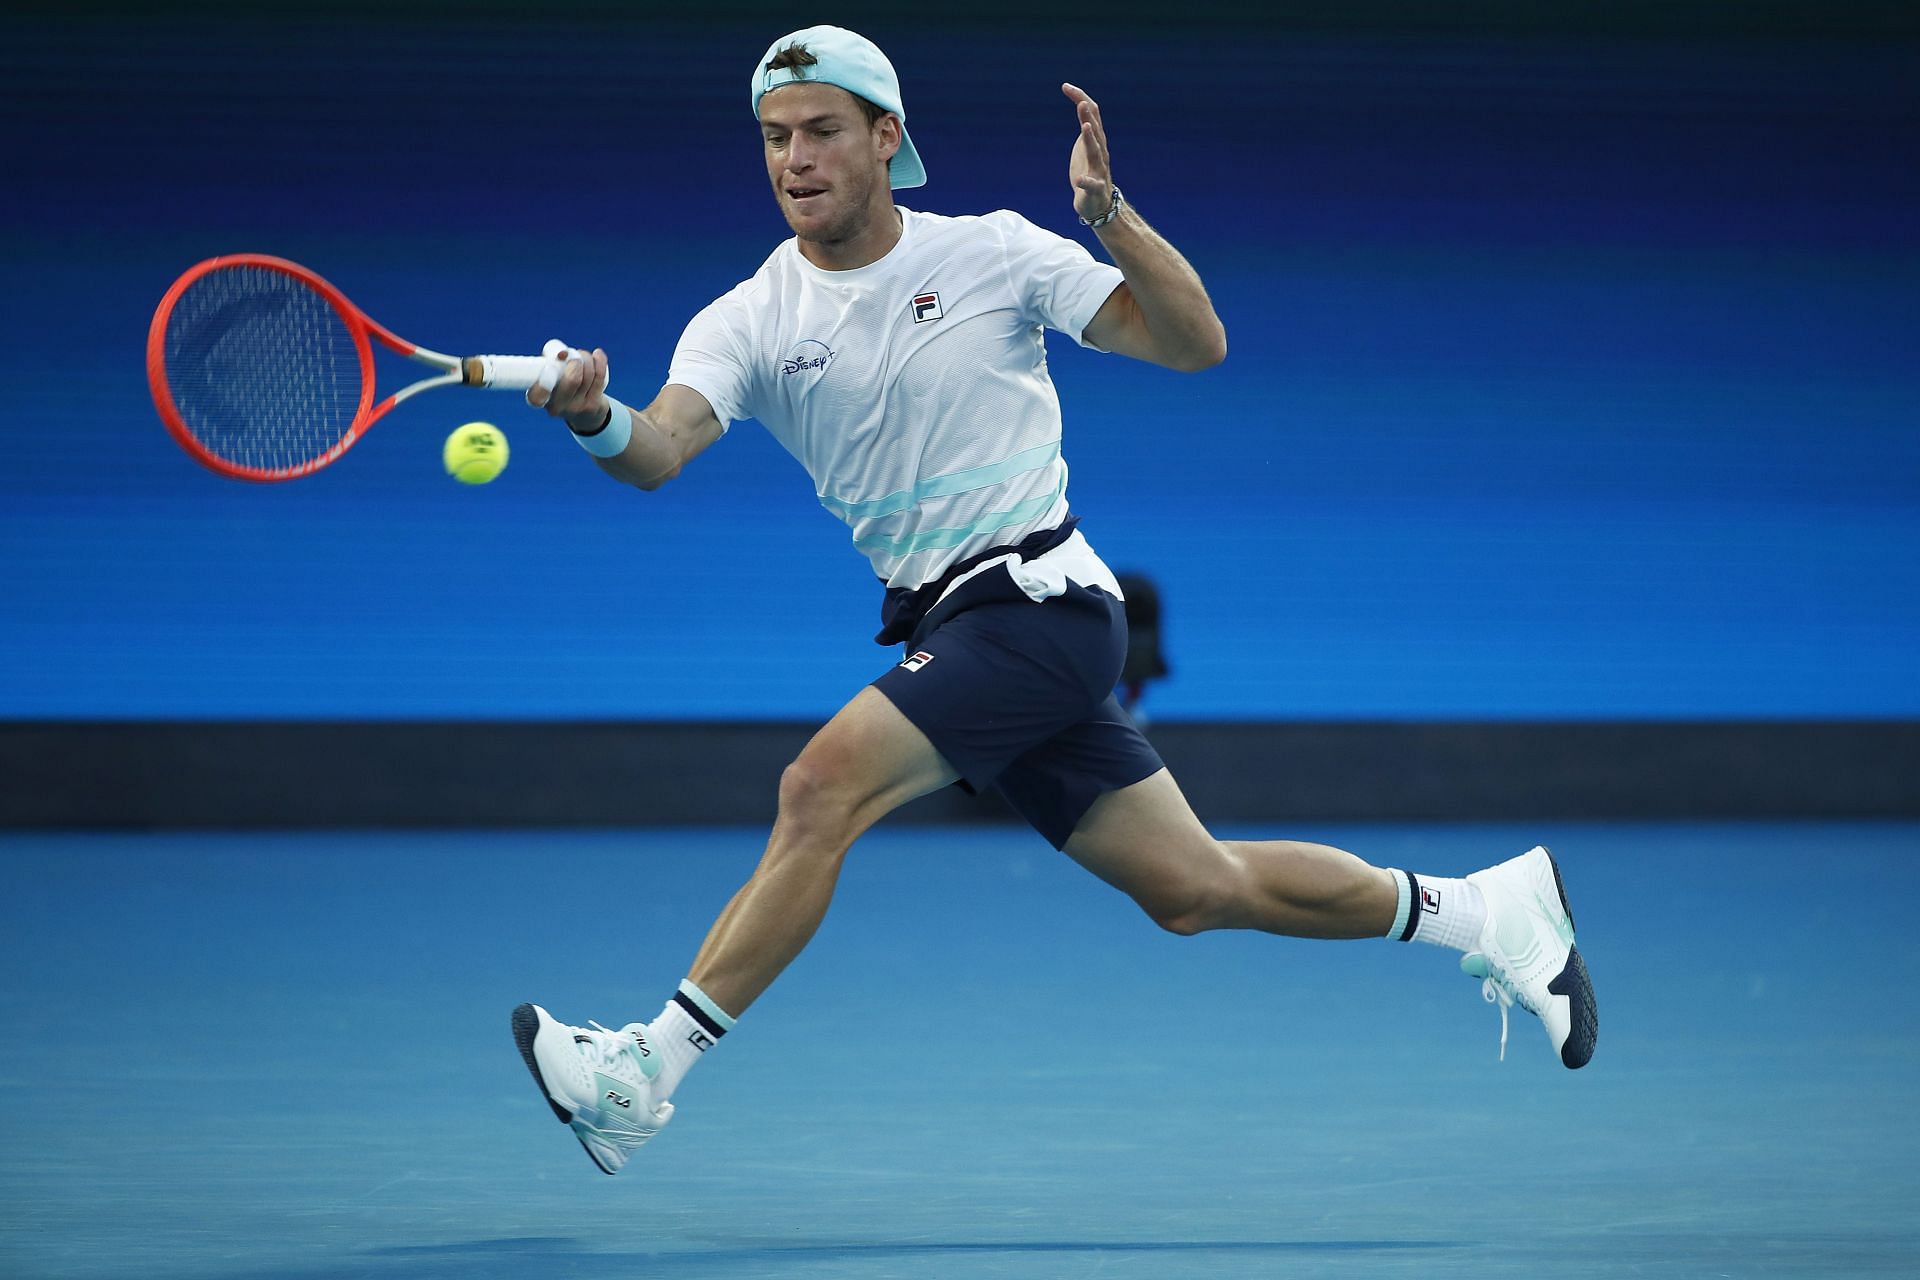 Diego Schwartzman helped Argentina finish as the Group D leaders on Day 1 of ATP Cup 2022